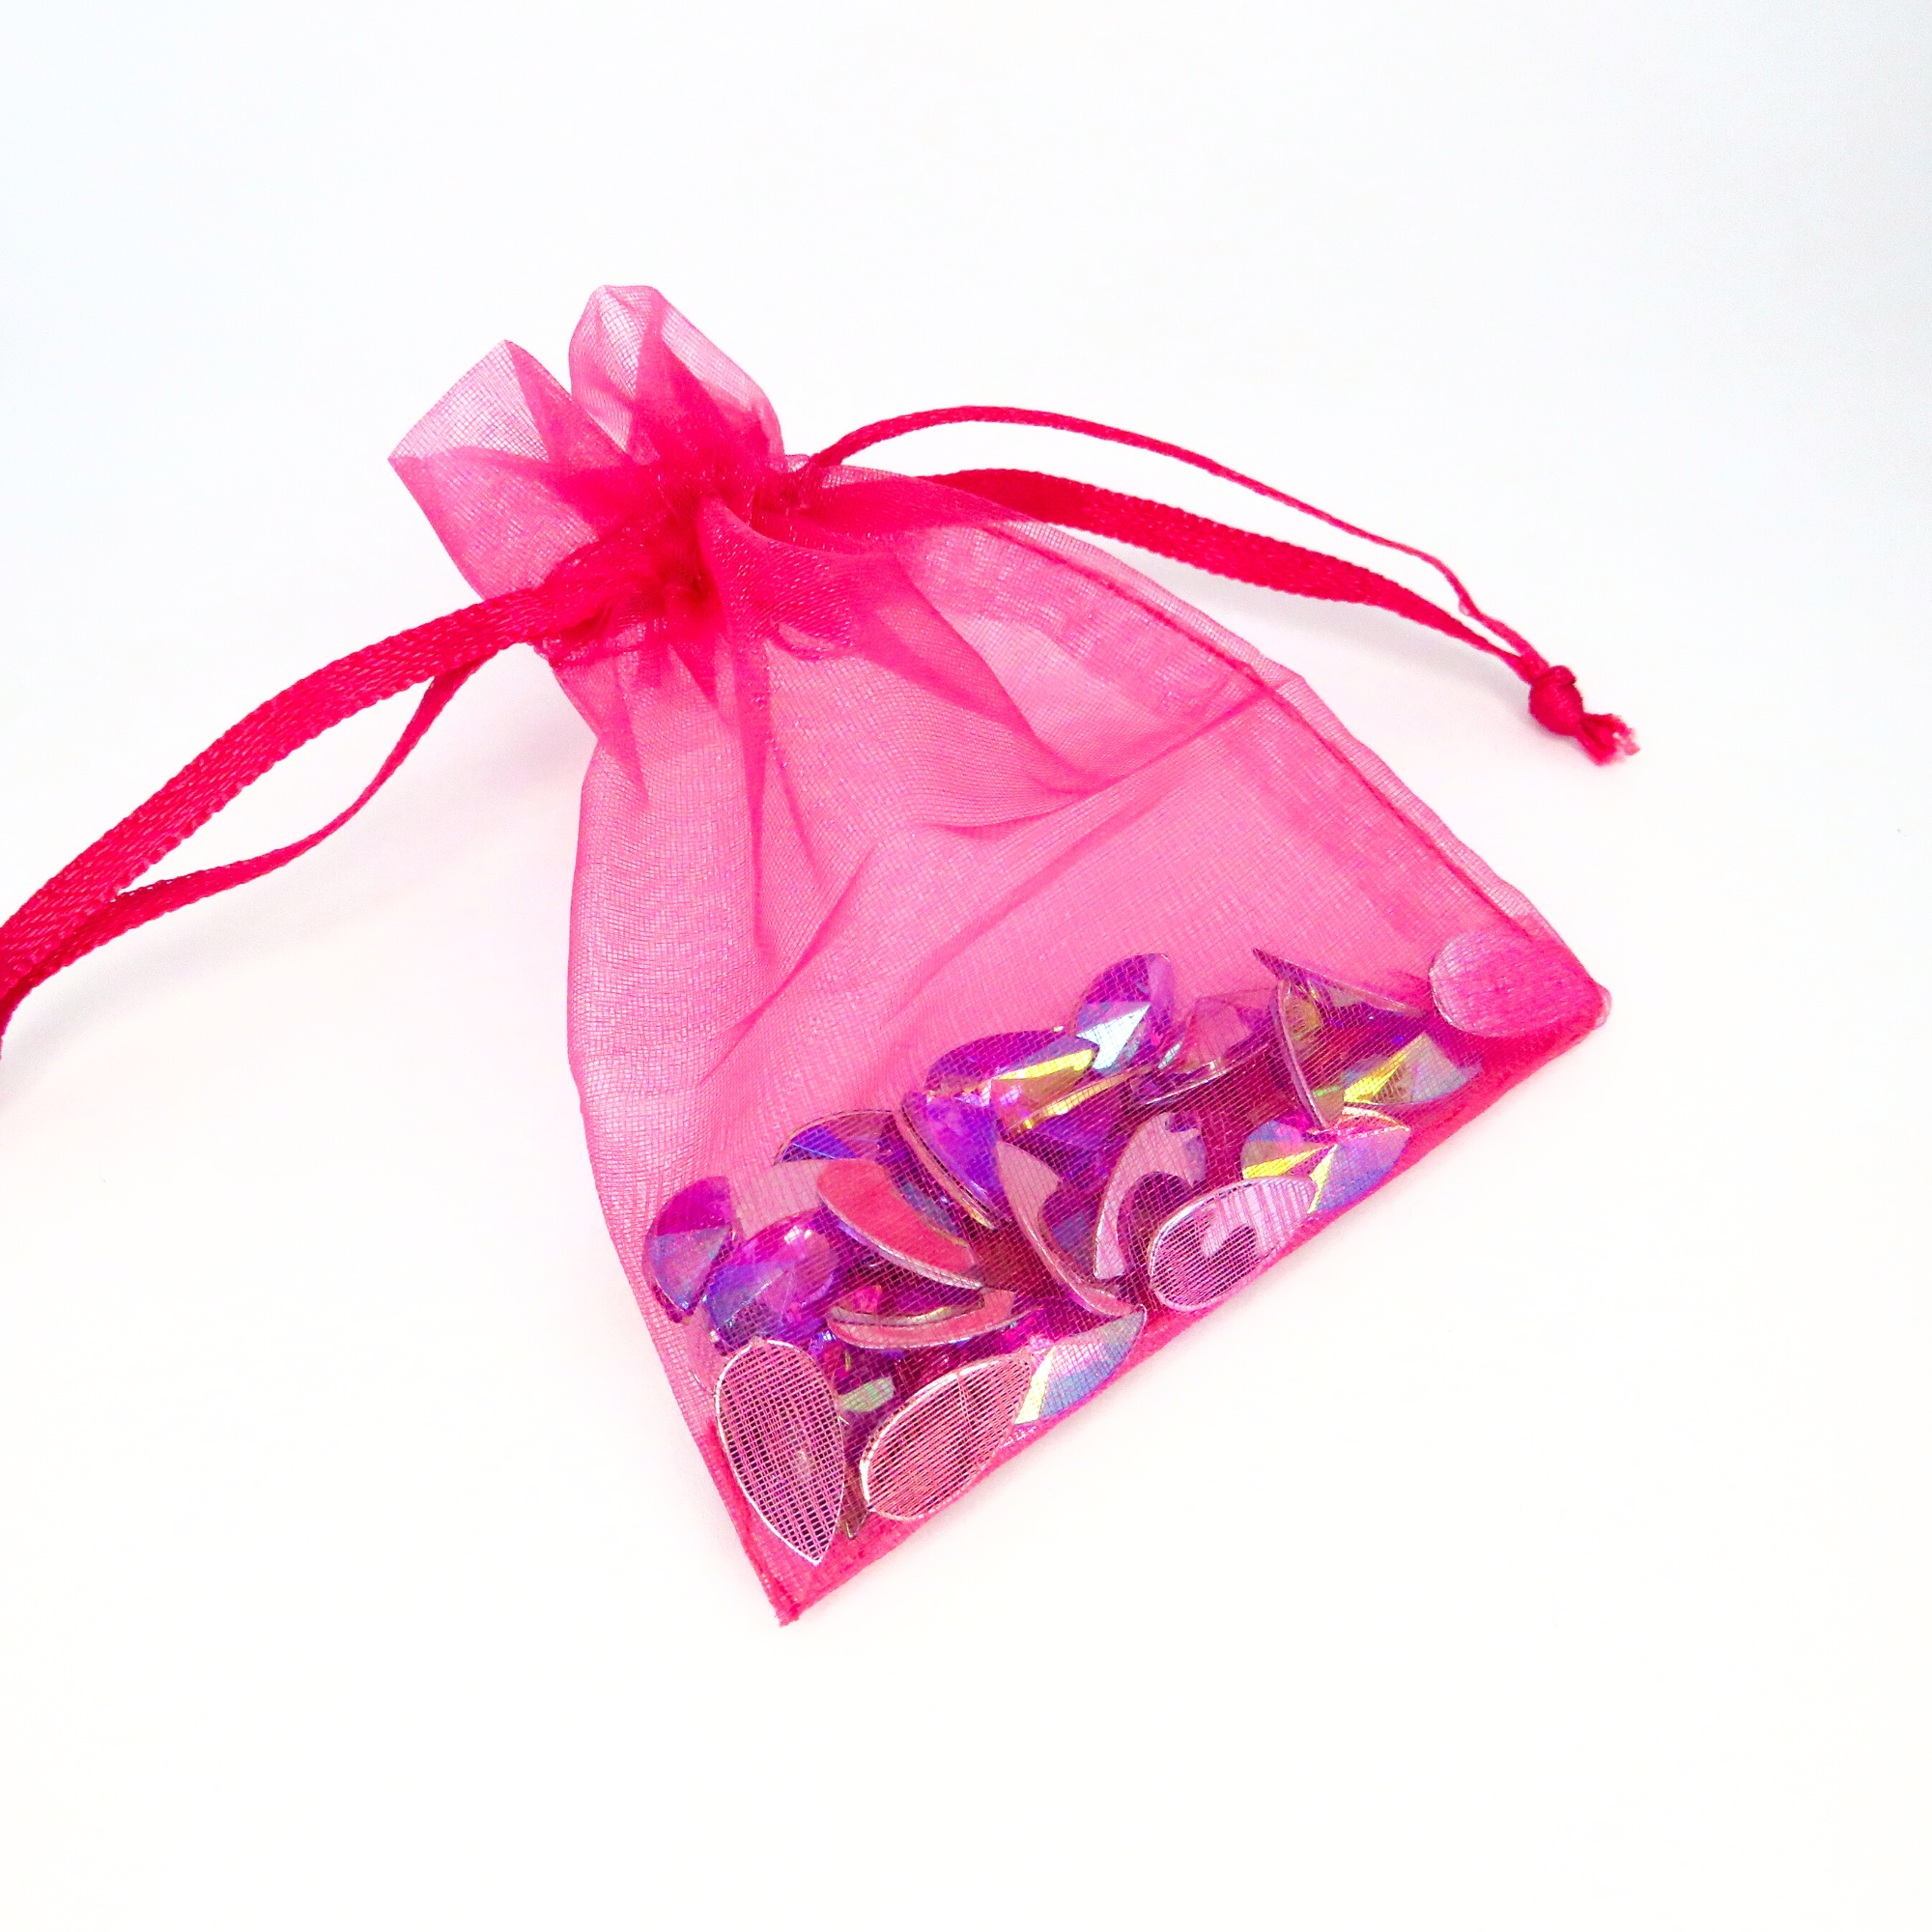 A pink organza drawstring bag filled with purple reusable face and body gems